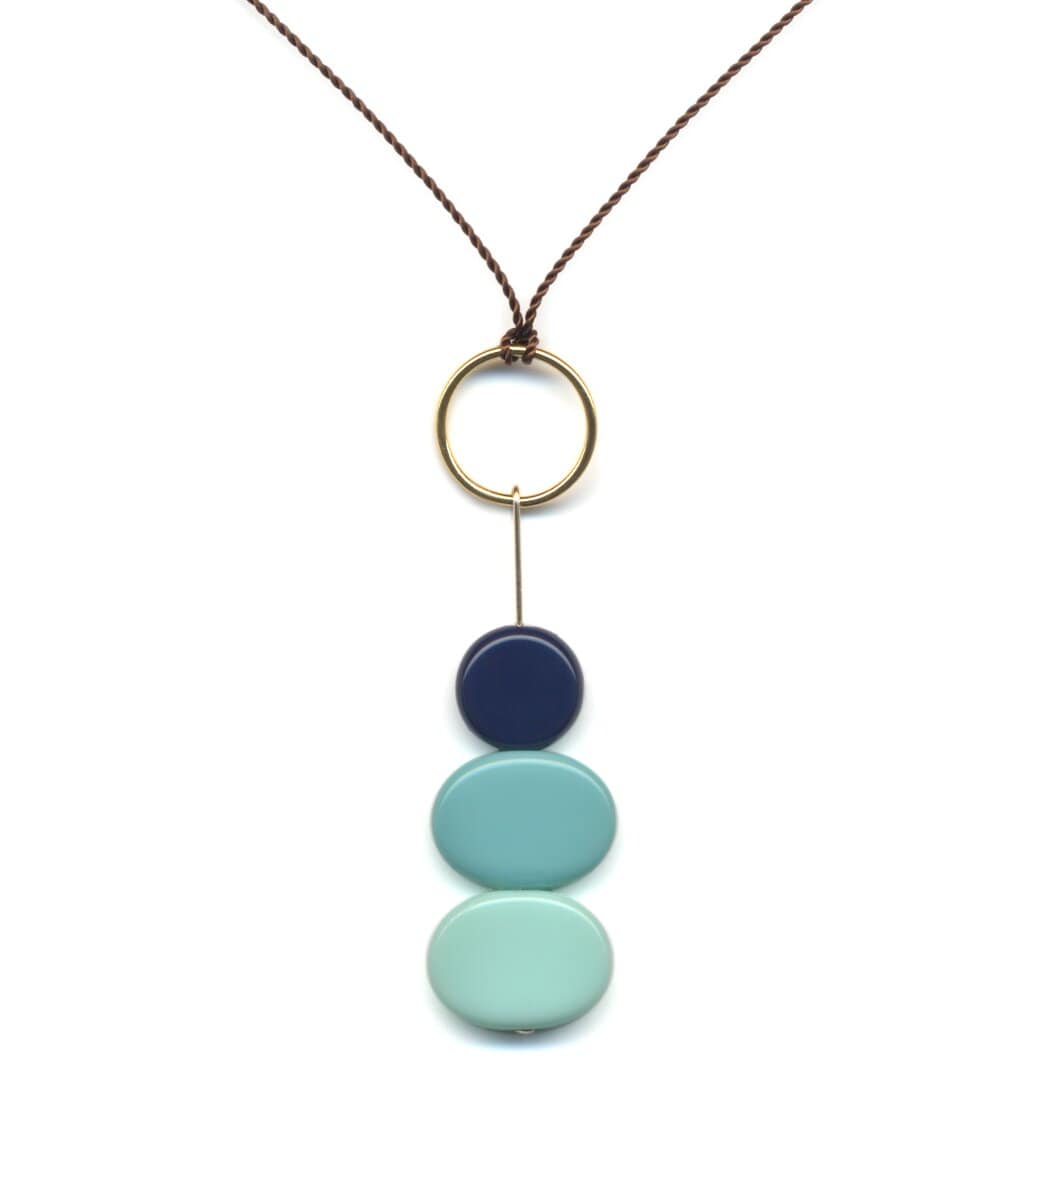 Irk Jewelry I. Ronni Kappos N1842 Blue Stacked Rocks Necklace